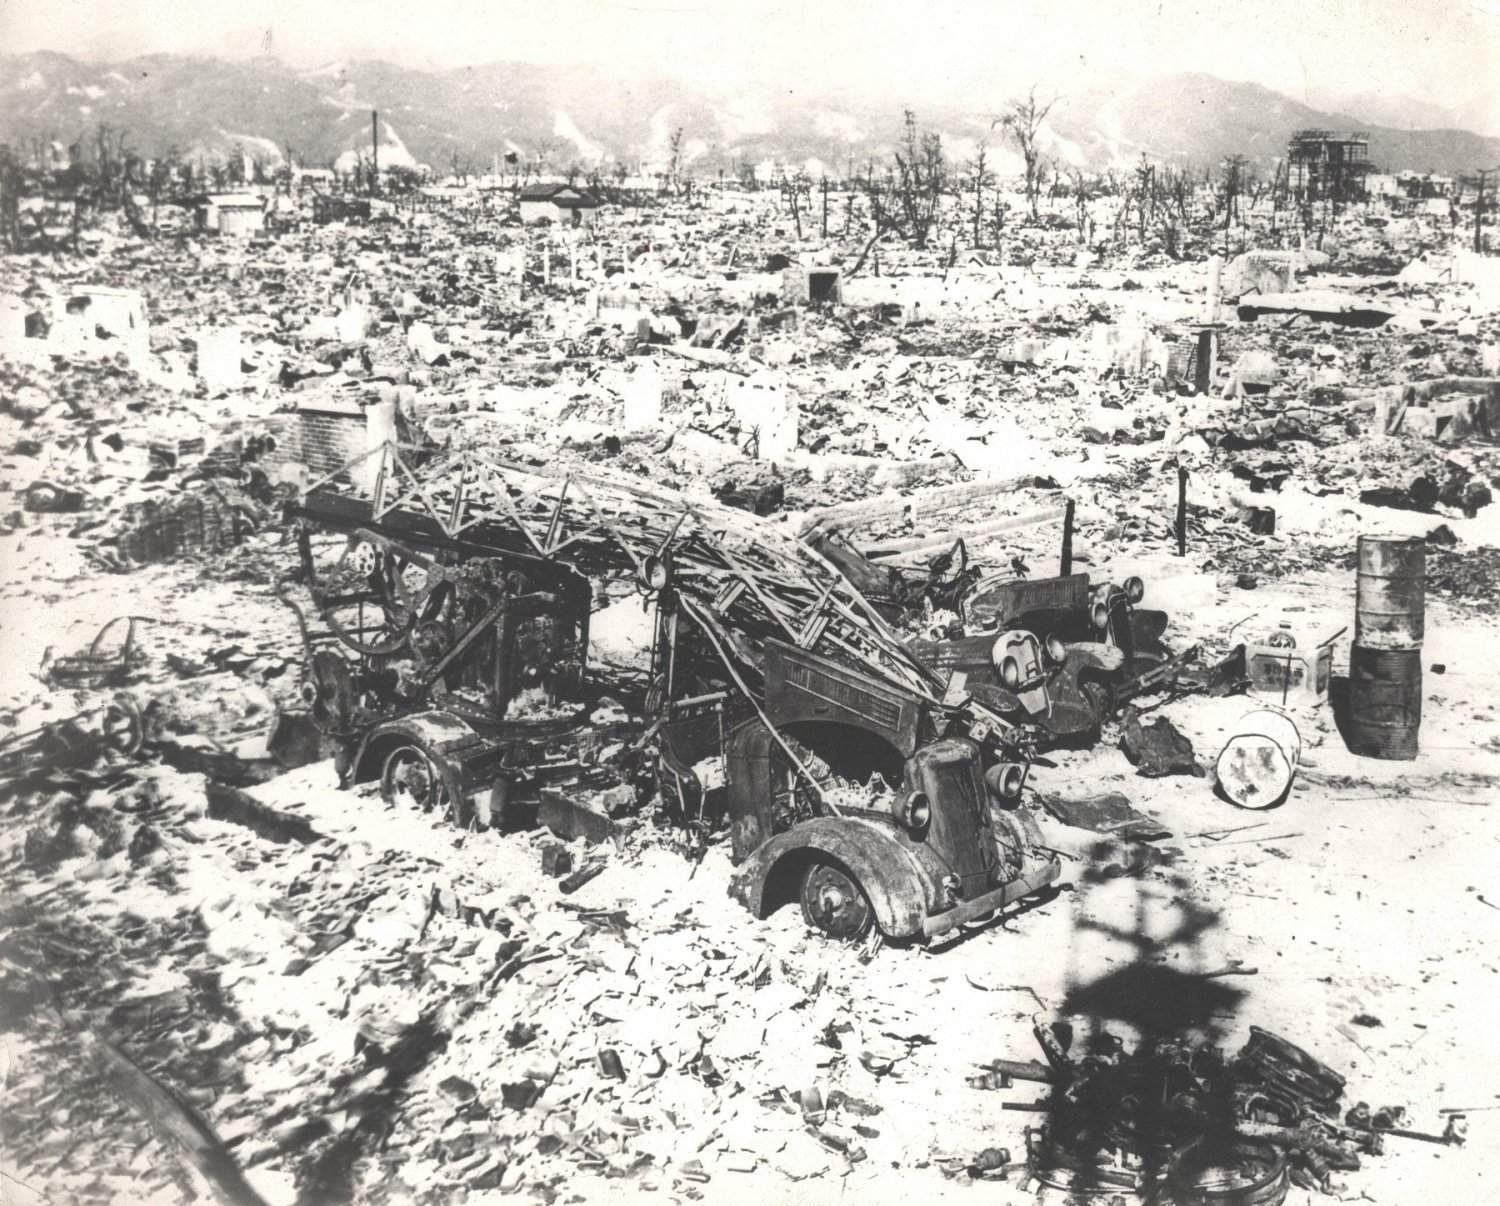 25 Photos Put The Depressing Aftermath Of Hiroshima Into Perspective